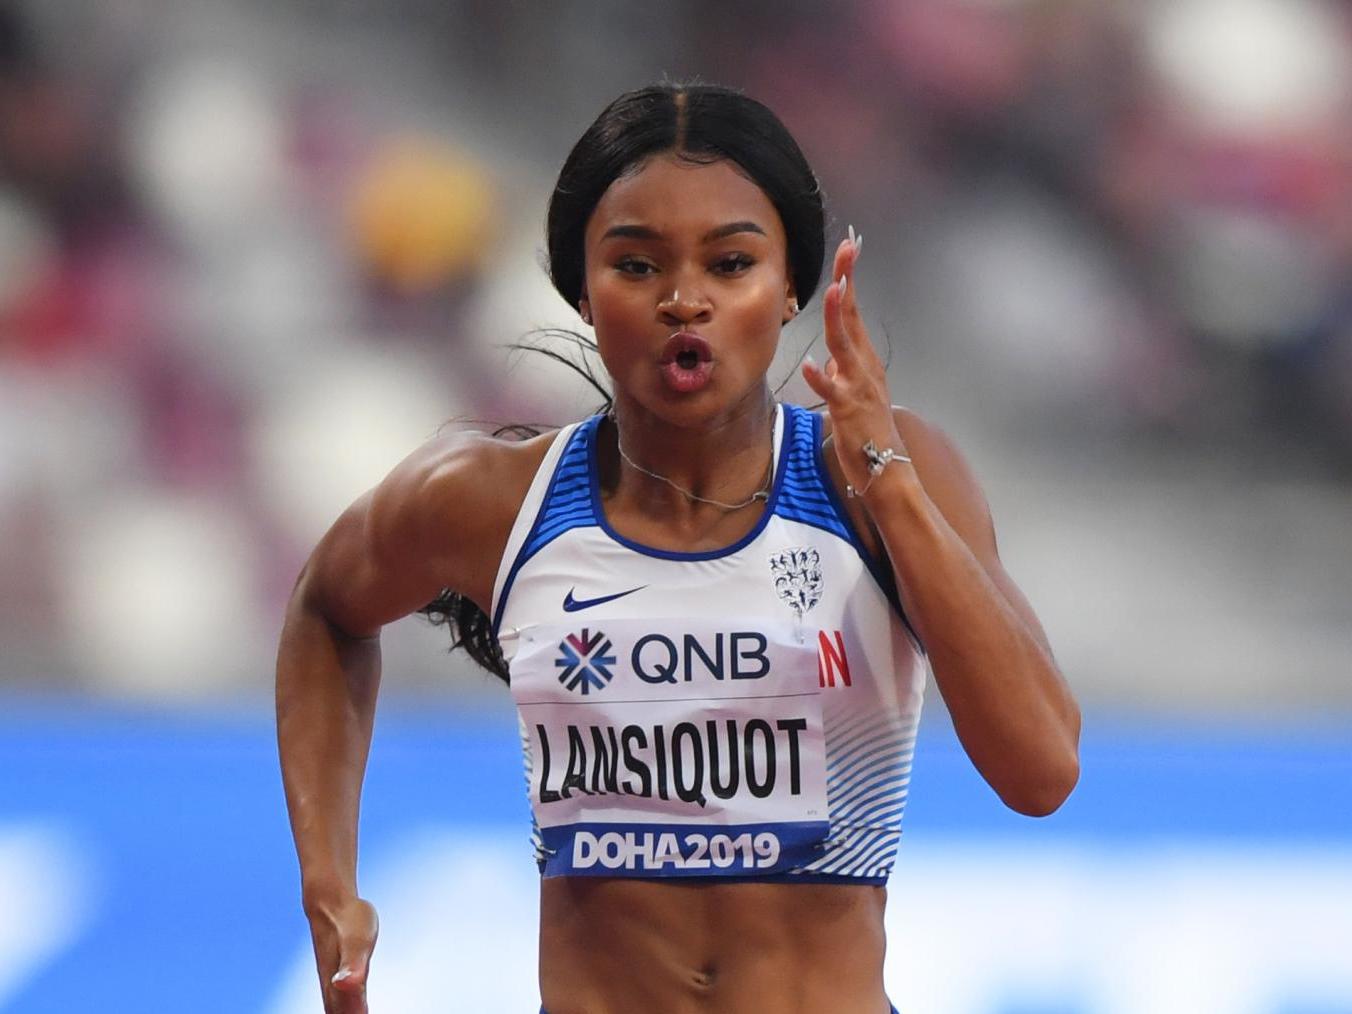 Lansiquot will be hoping for a medal in Tokyo